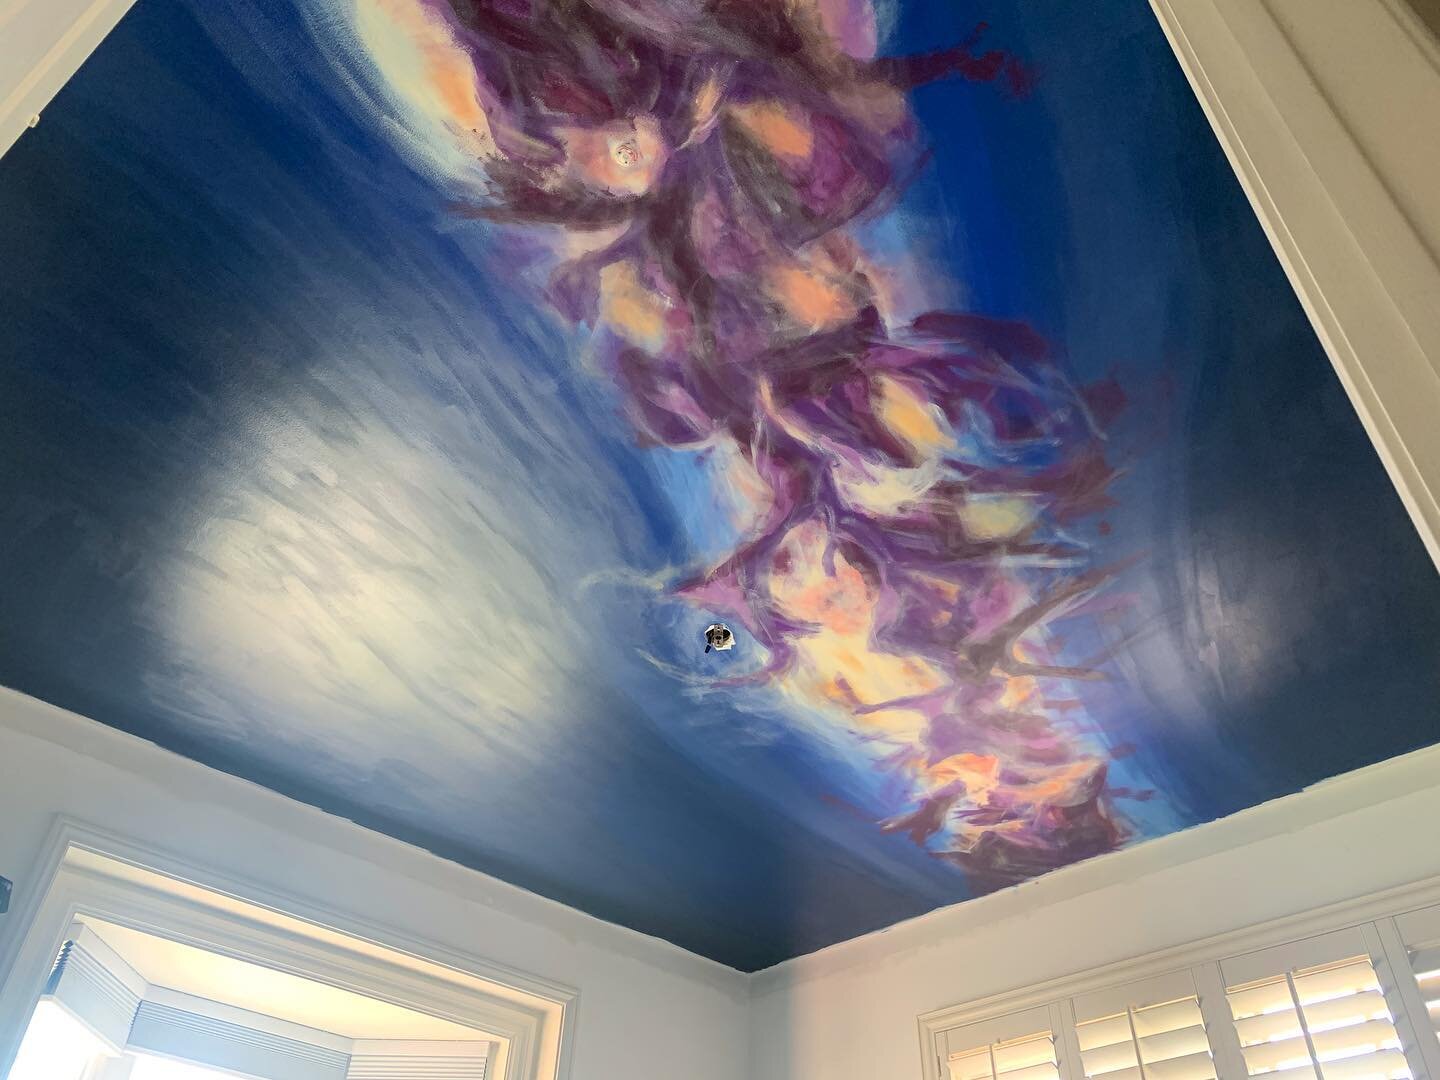 Progress is being made on the #milkywaymural for the nursery! Hoping to have it done either today or tomorrow. Once I add all the stars it will really transform!
#nursery #space #nasa #milkyway #milkywaygalaxy #mural #ceilingmural #diy #diynursery #d